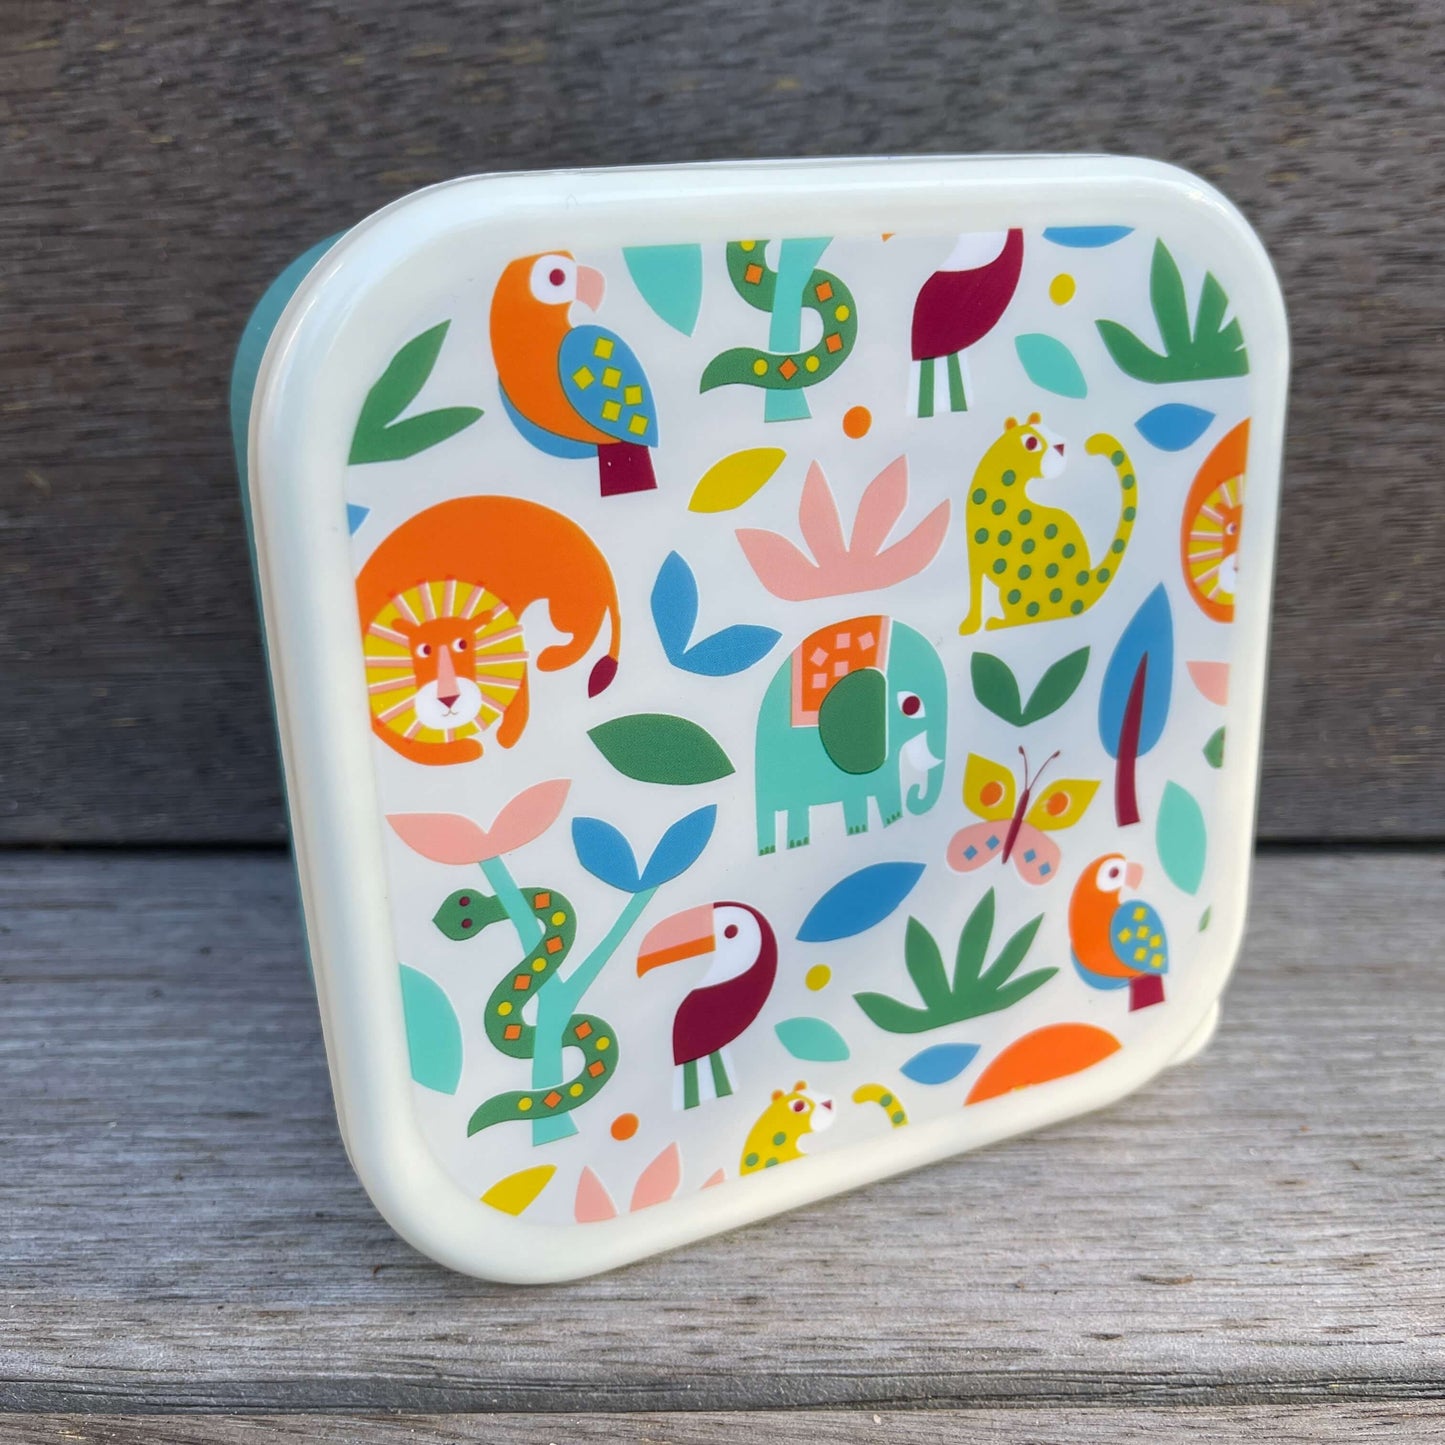 Trio of snack boxes featuring jungle animals on the lids.